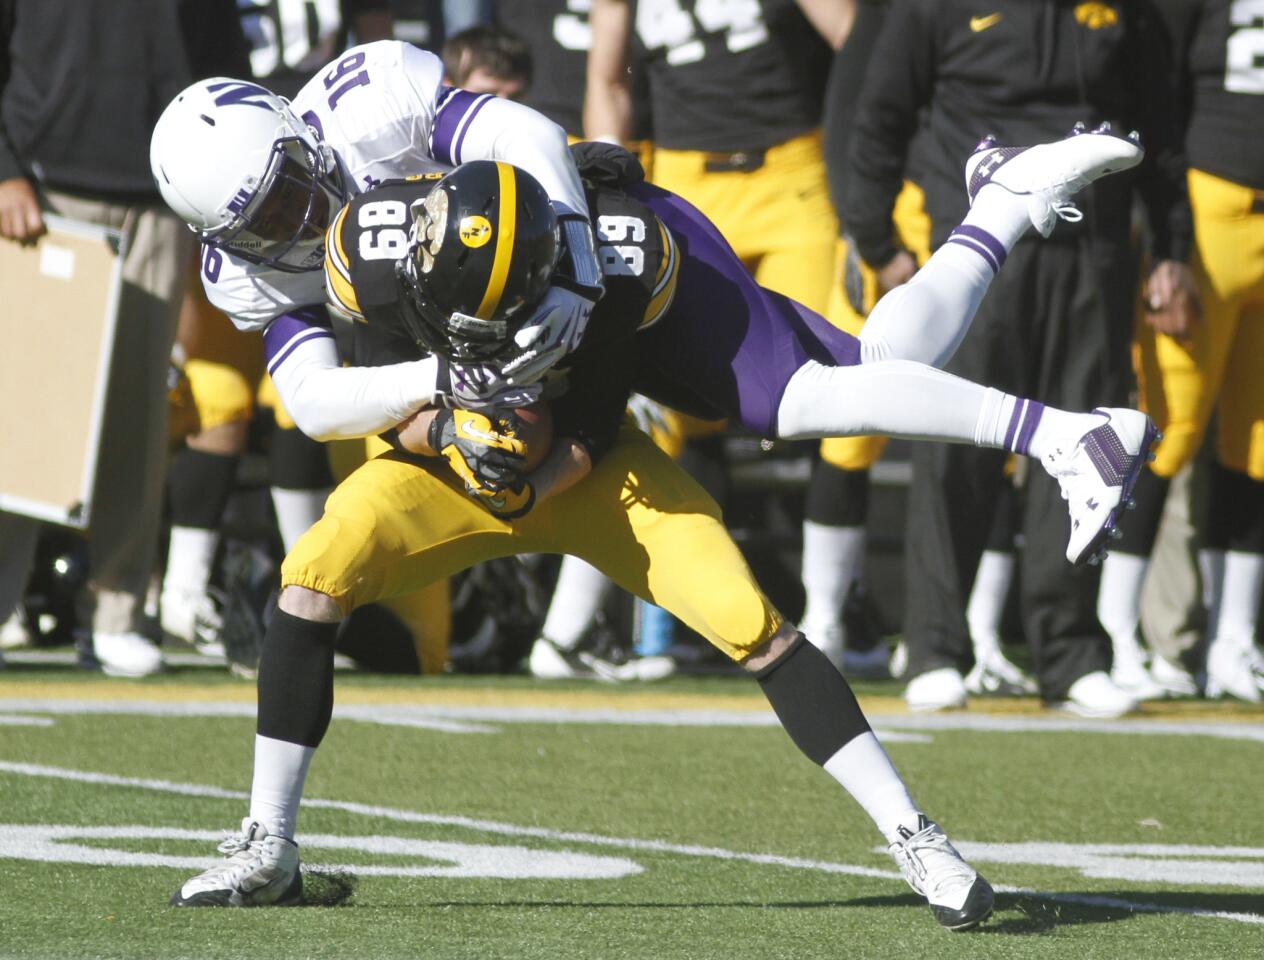 Iowa wide receiver Matt VandeBerg is tackled by Northwestern safety Godwin Igwebuike in the first quarter.